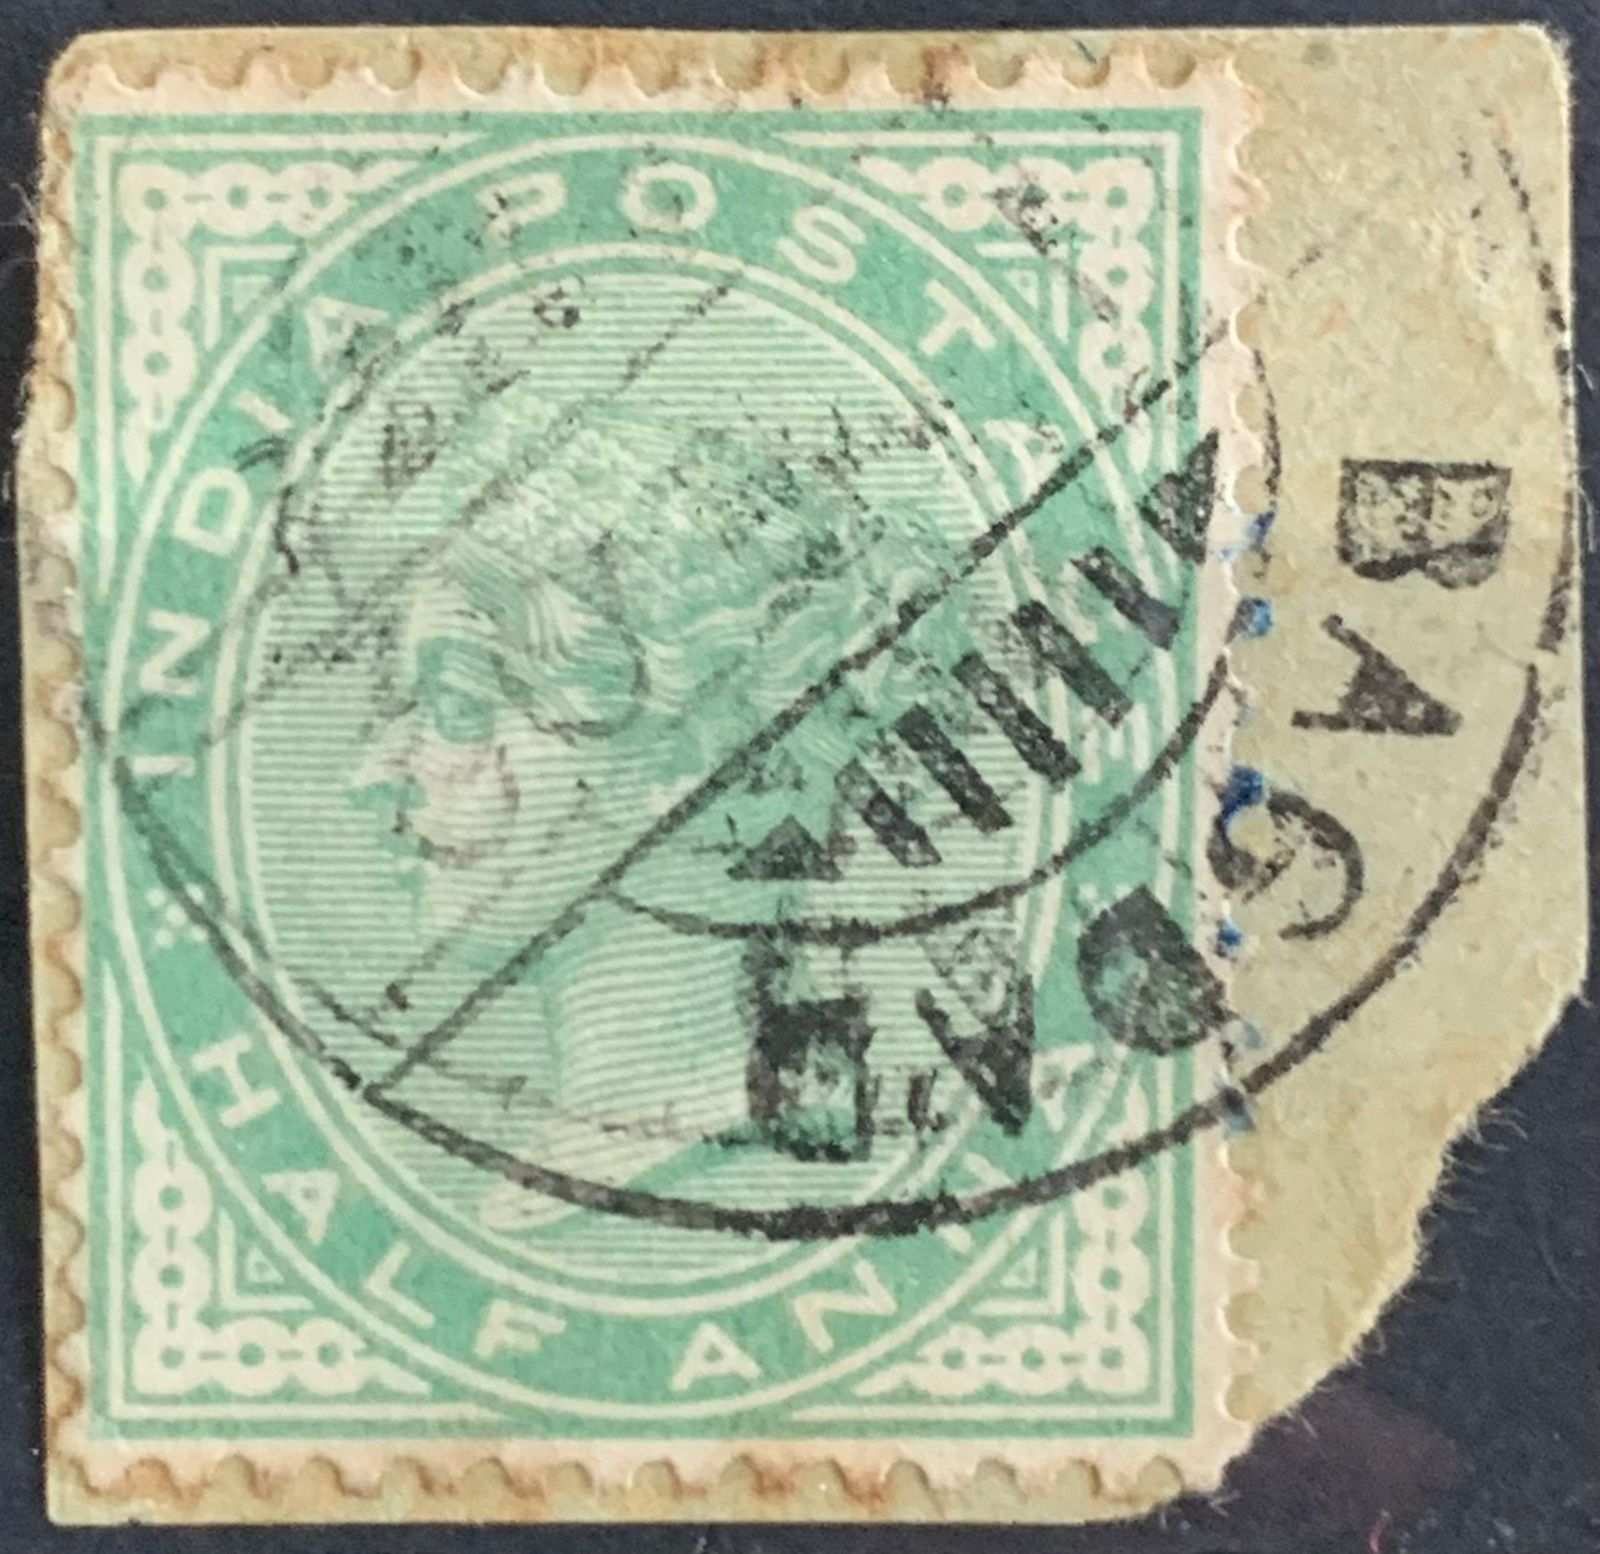 India 1900 QV 1/2a Used Abroad in BAGDAD Fine Cancelled